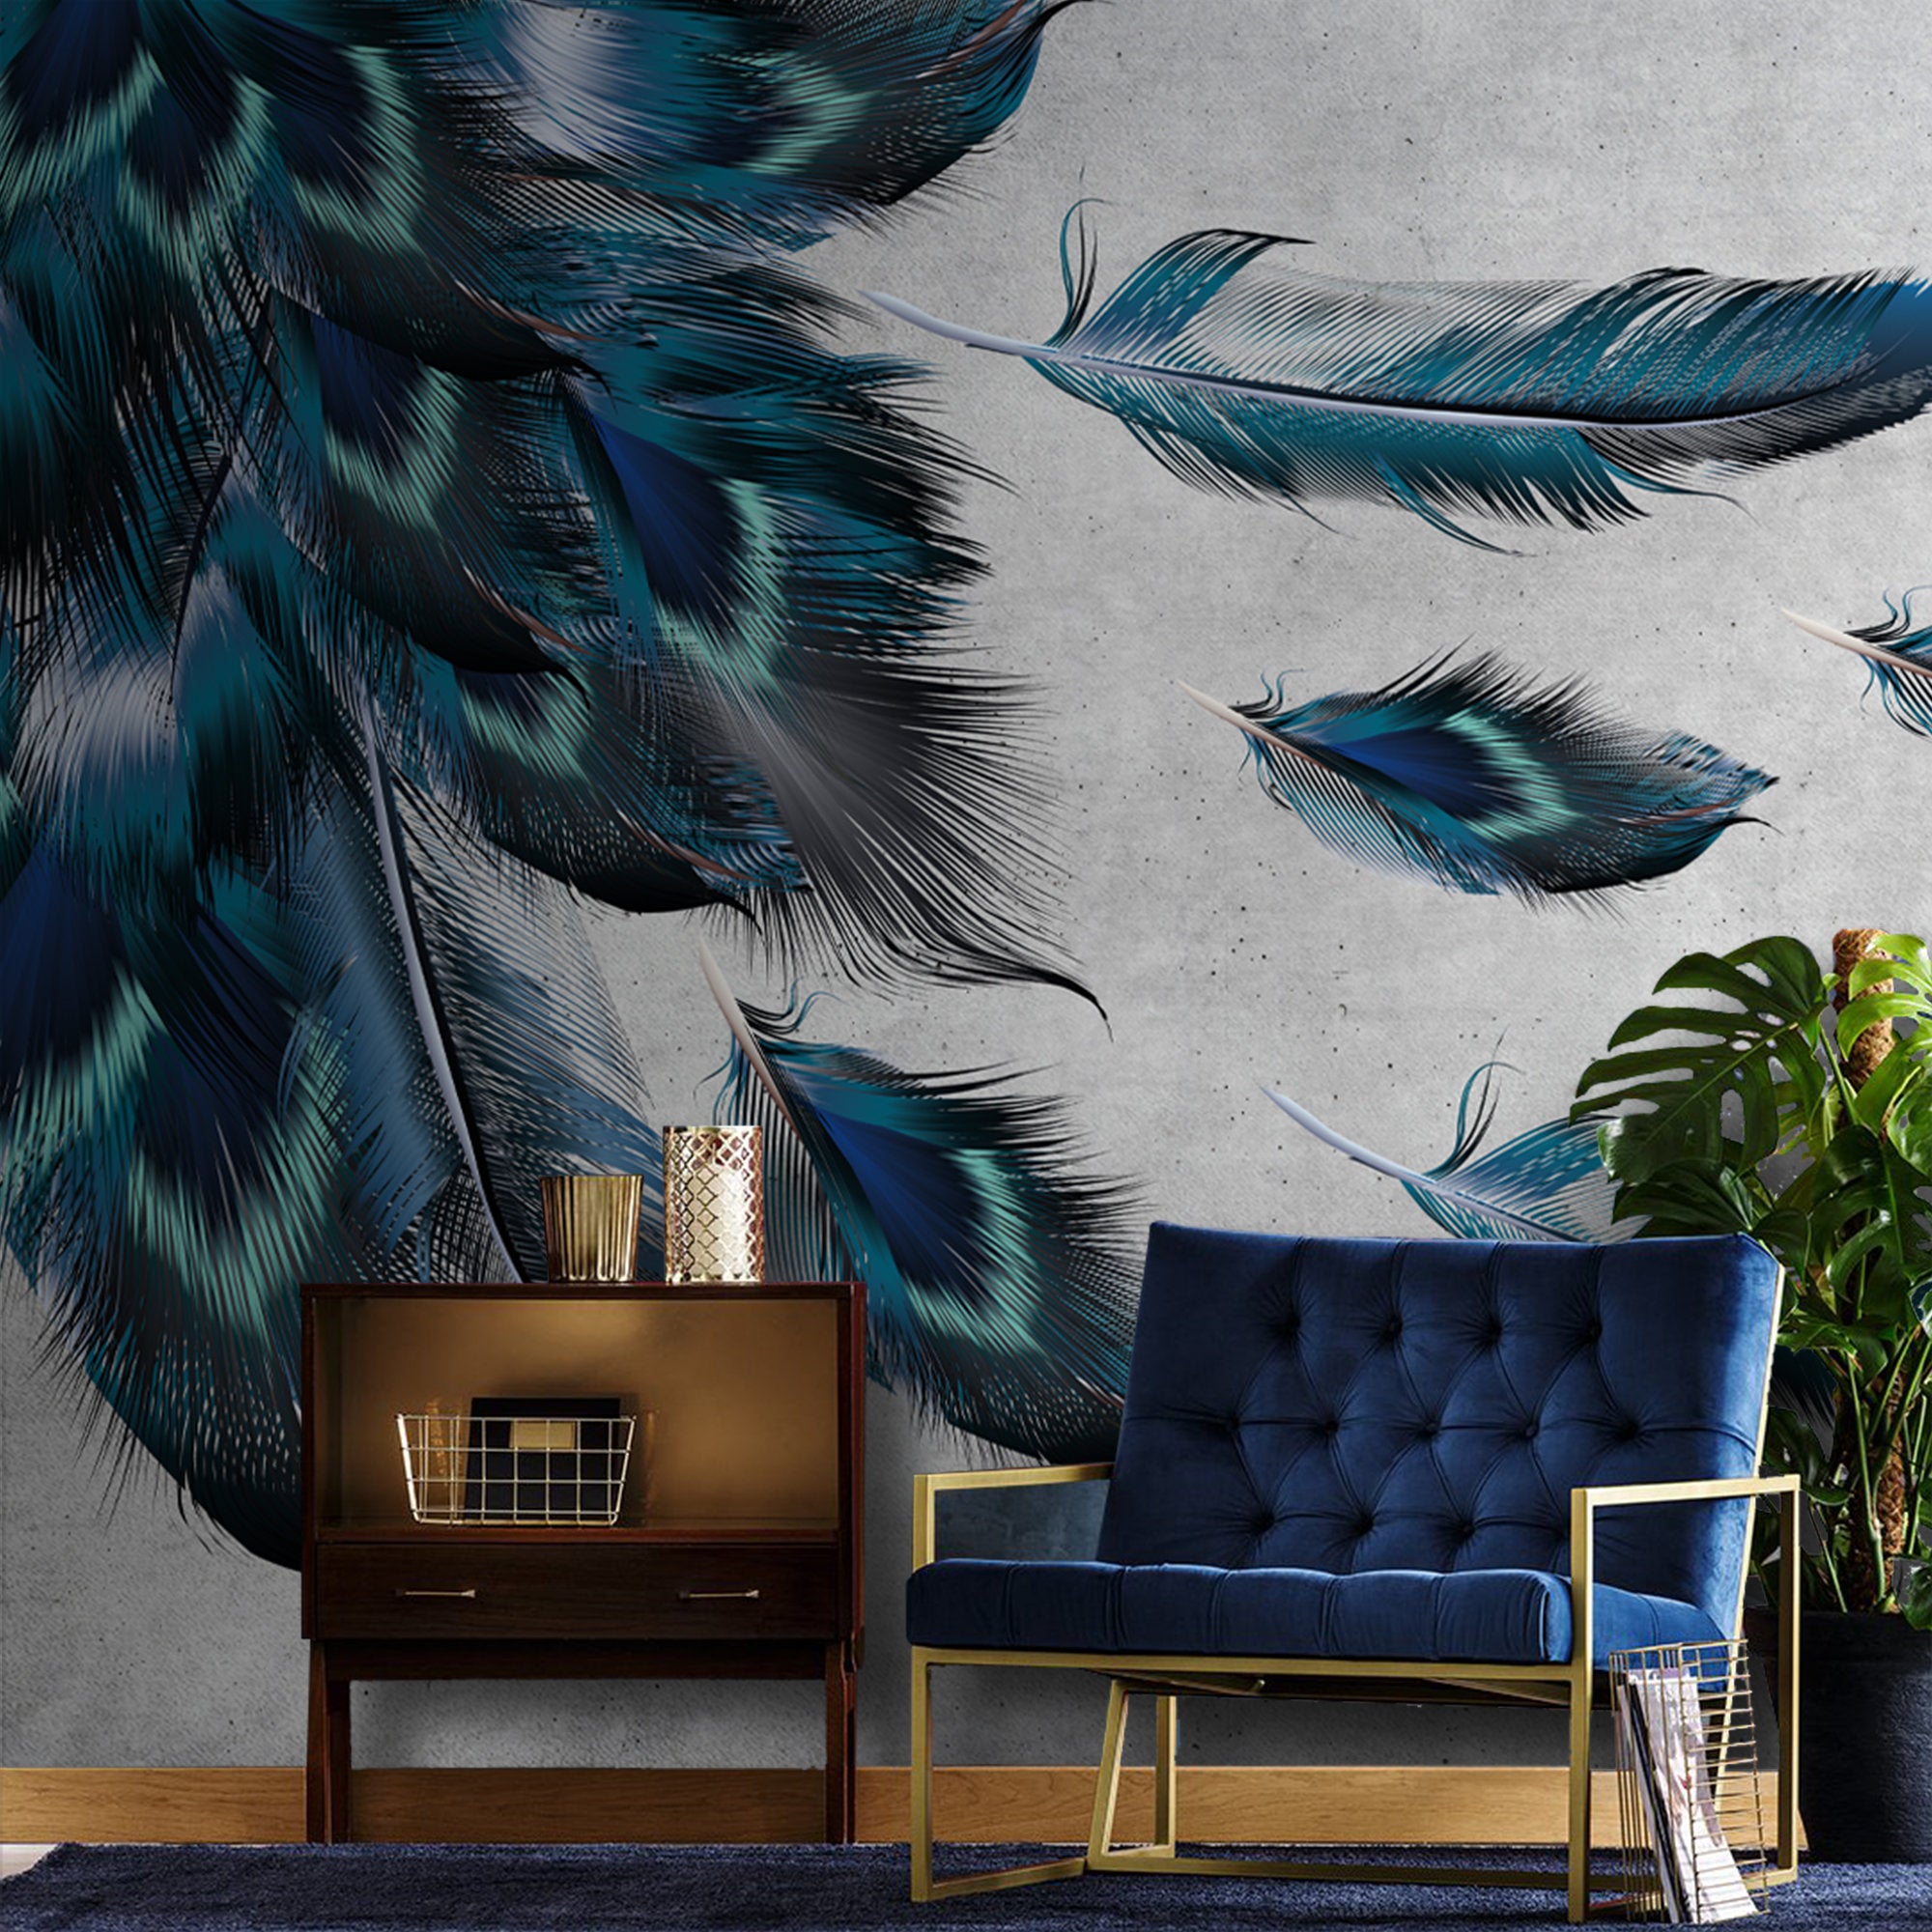 Gorgeous Bird Feathers Wallpaper Self Adhesive Peel and Stick Wall Sticker Wall Decoration Minimalistic Scandinavian Design Removable